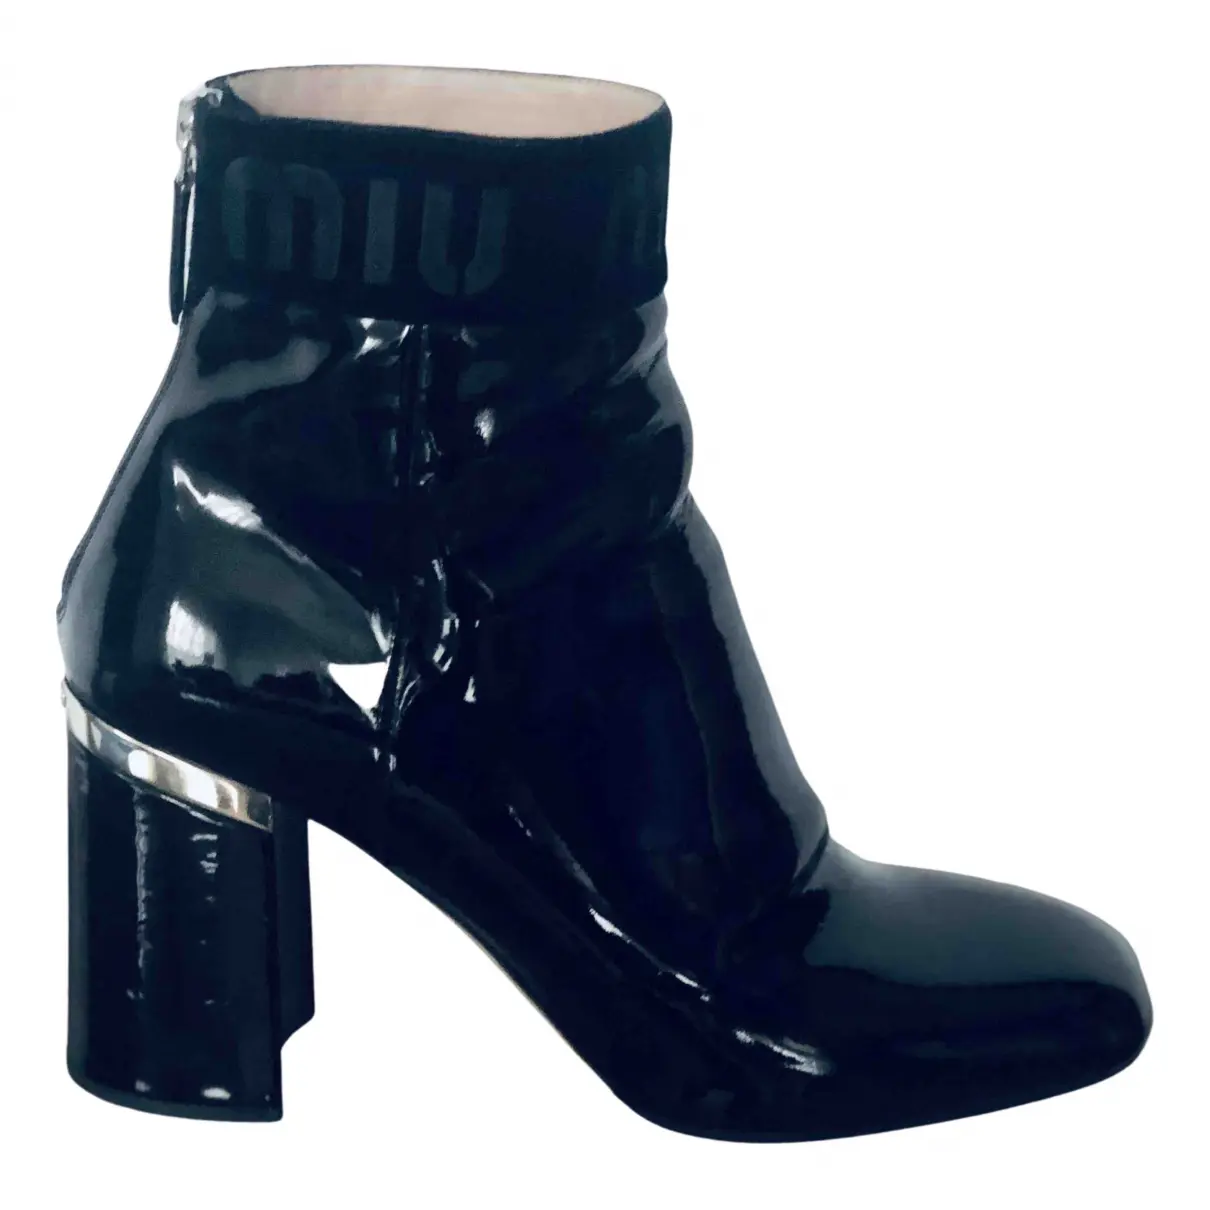 Patent leather ankle boots Miu Miu